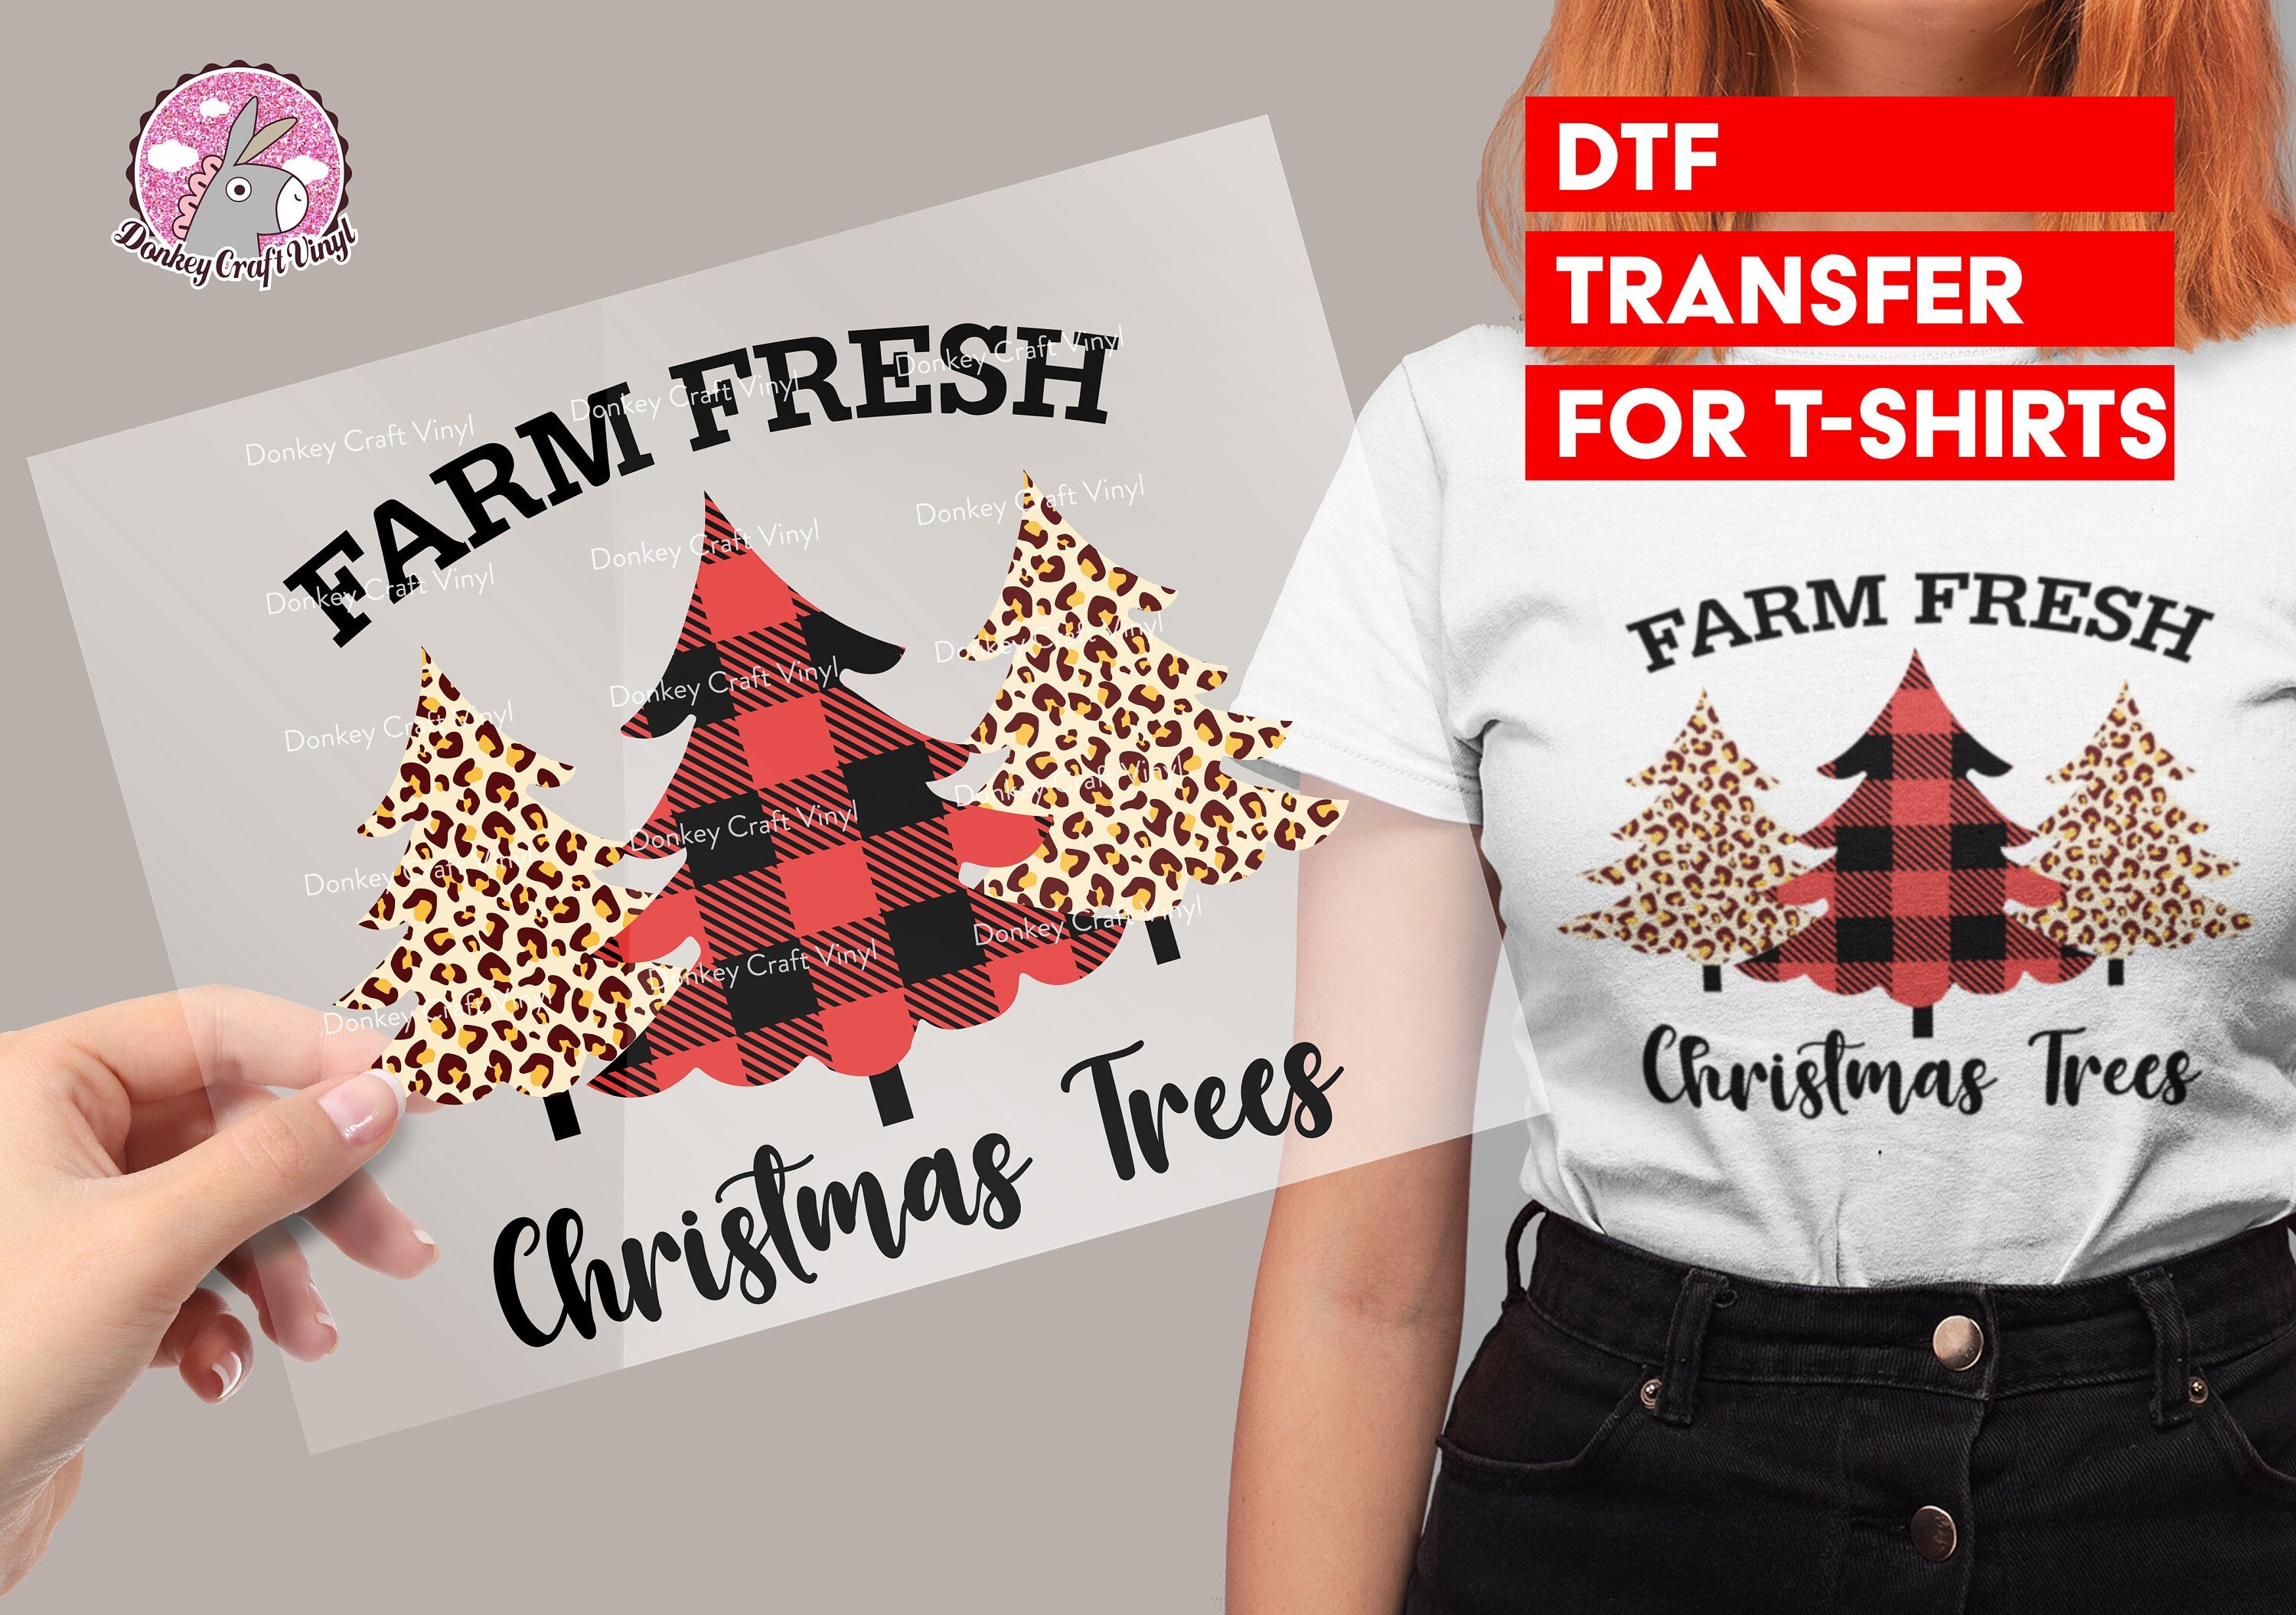 Only 6 Processes to Make a T-shirt #CenDale DTF Transfer Film, are yo